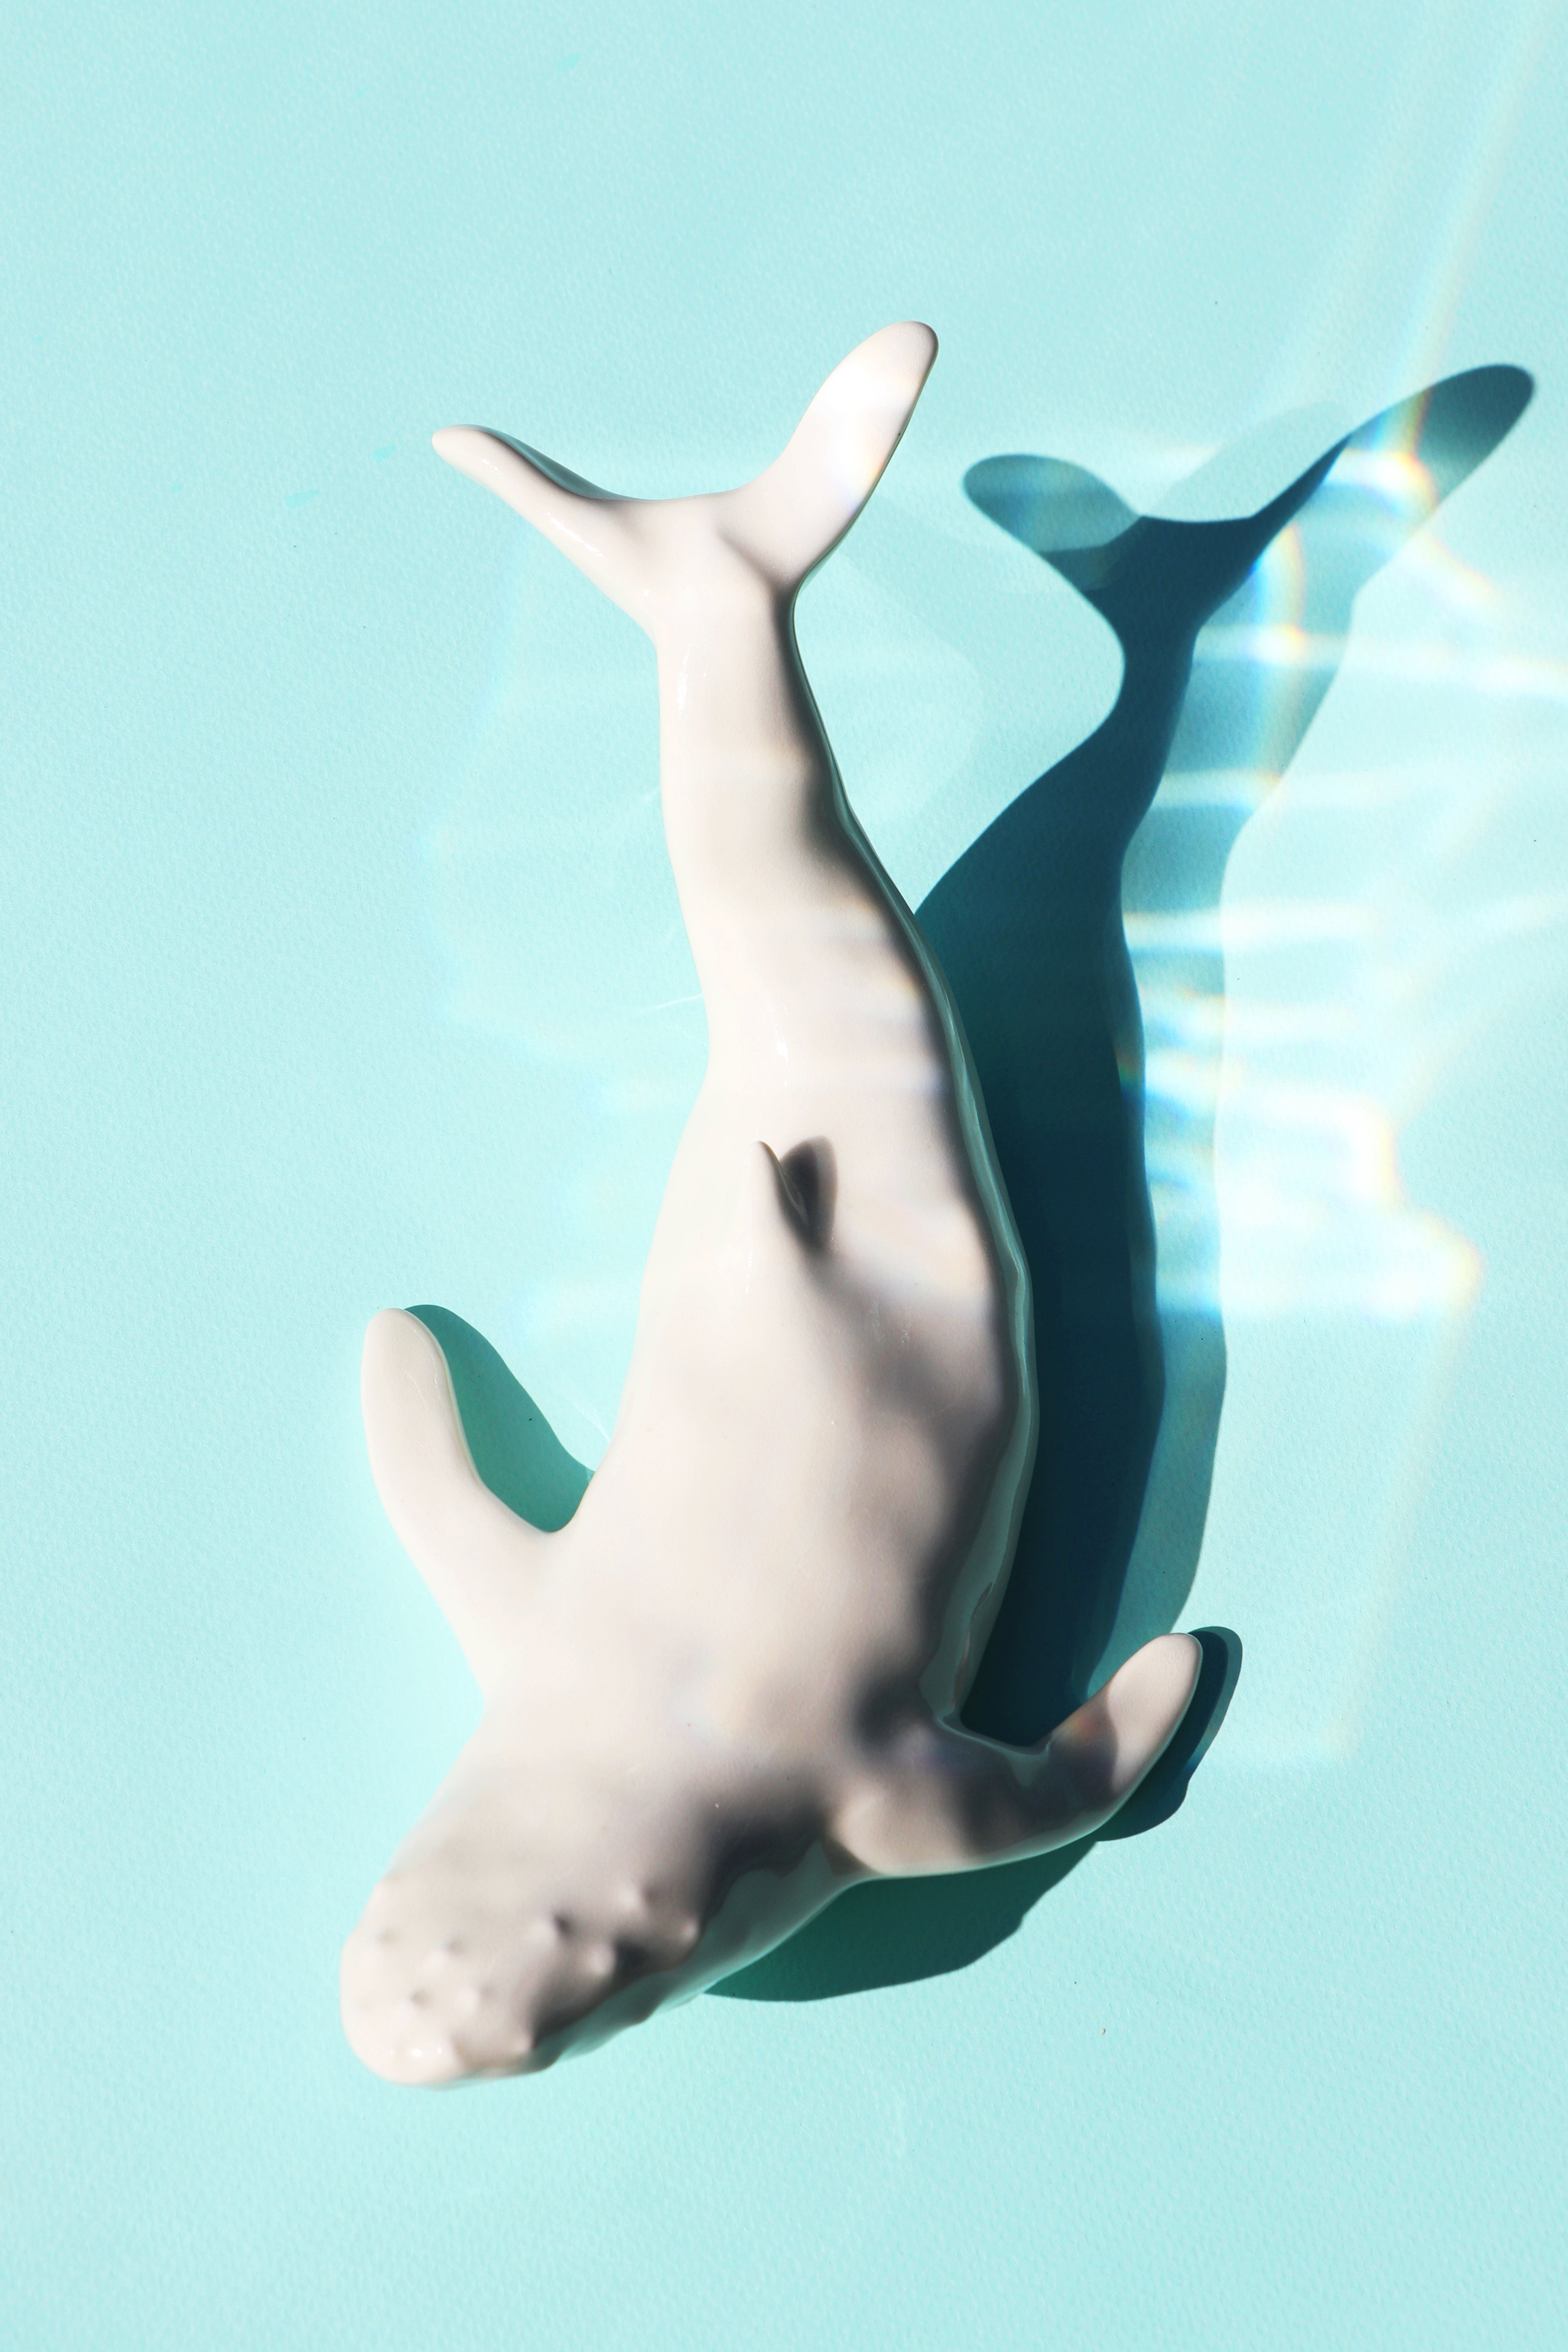 White ceramic humpback whale against a turquoise background. The whale is pictured from above with wavelike reflections.